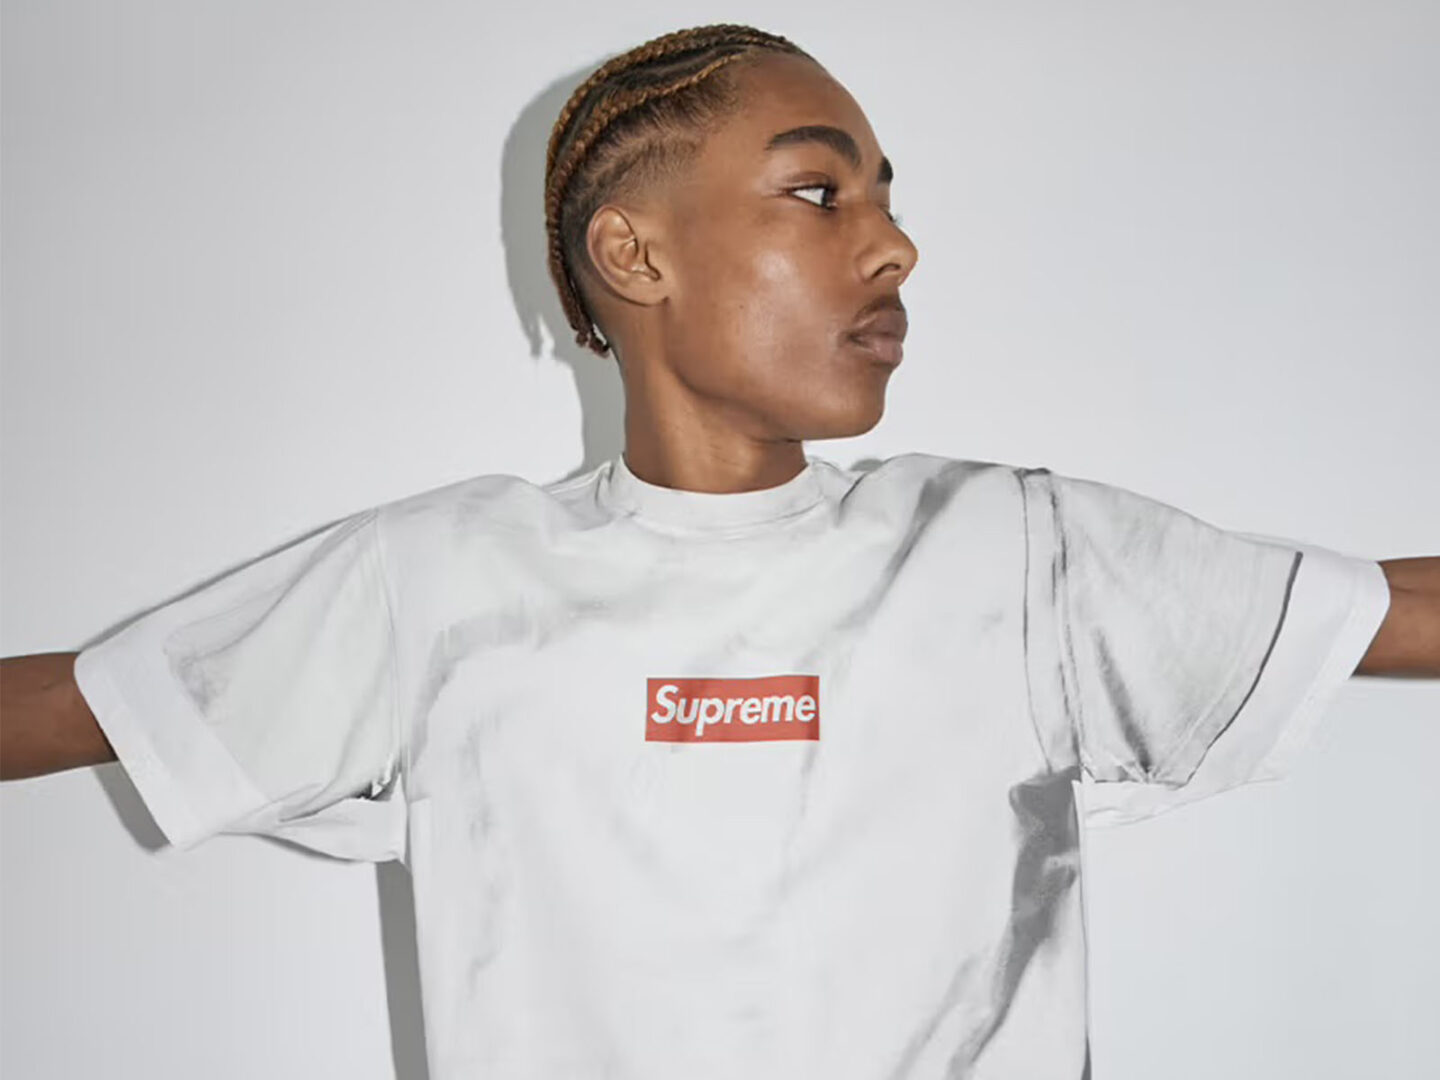 Supreme x MM6 Maison Margiela: The collaboration we have been waiting for